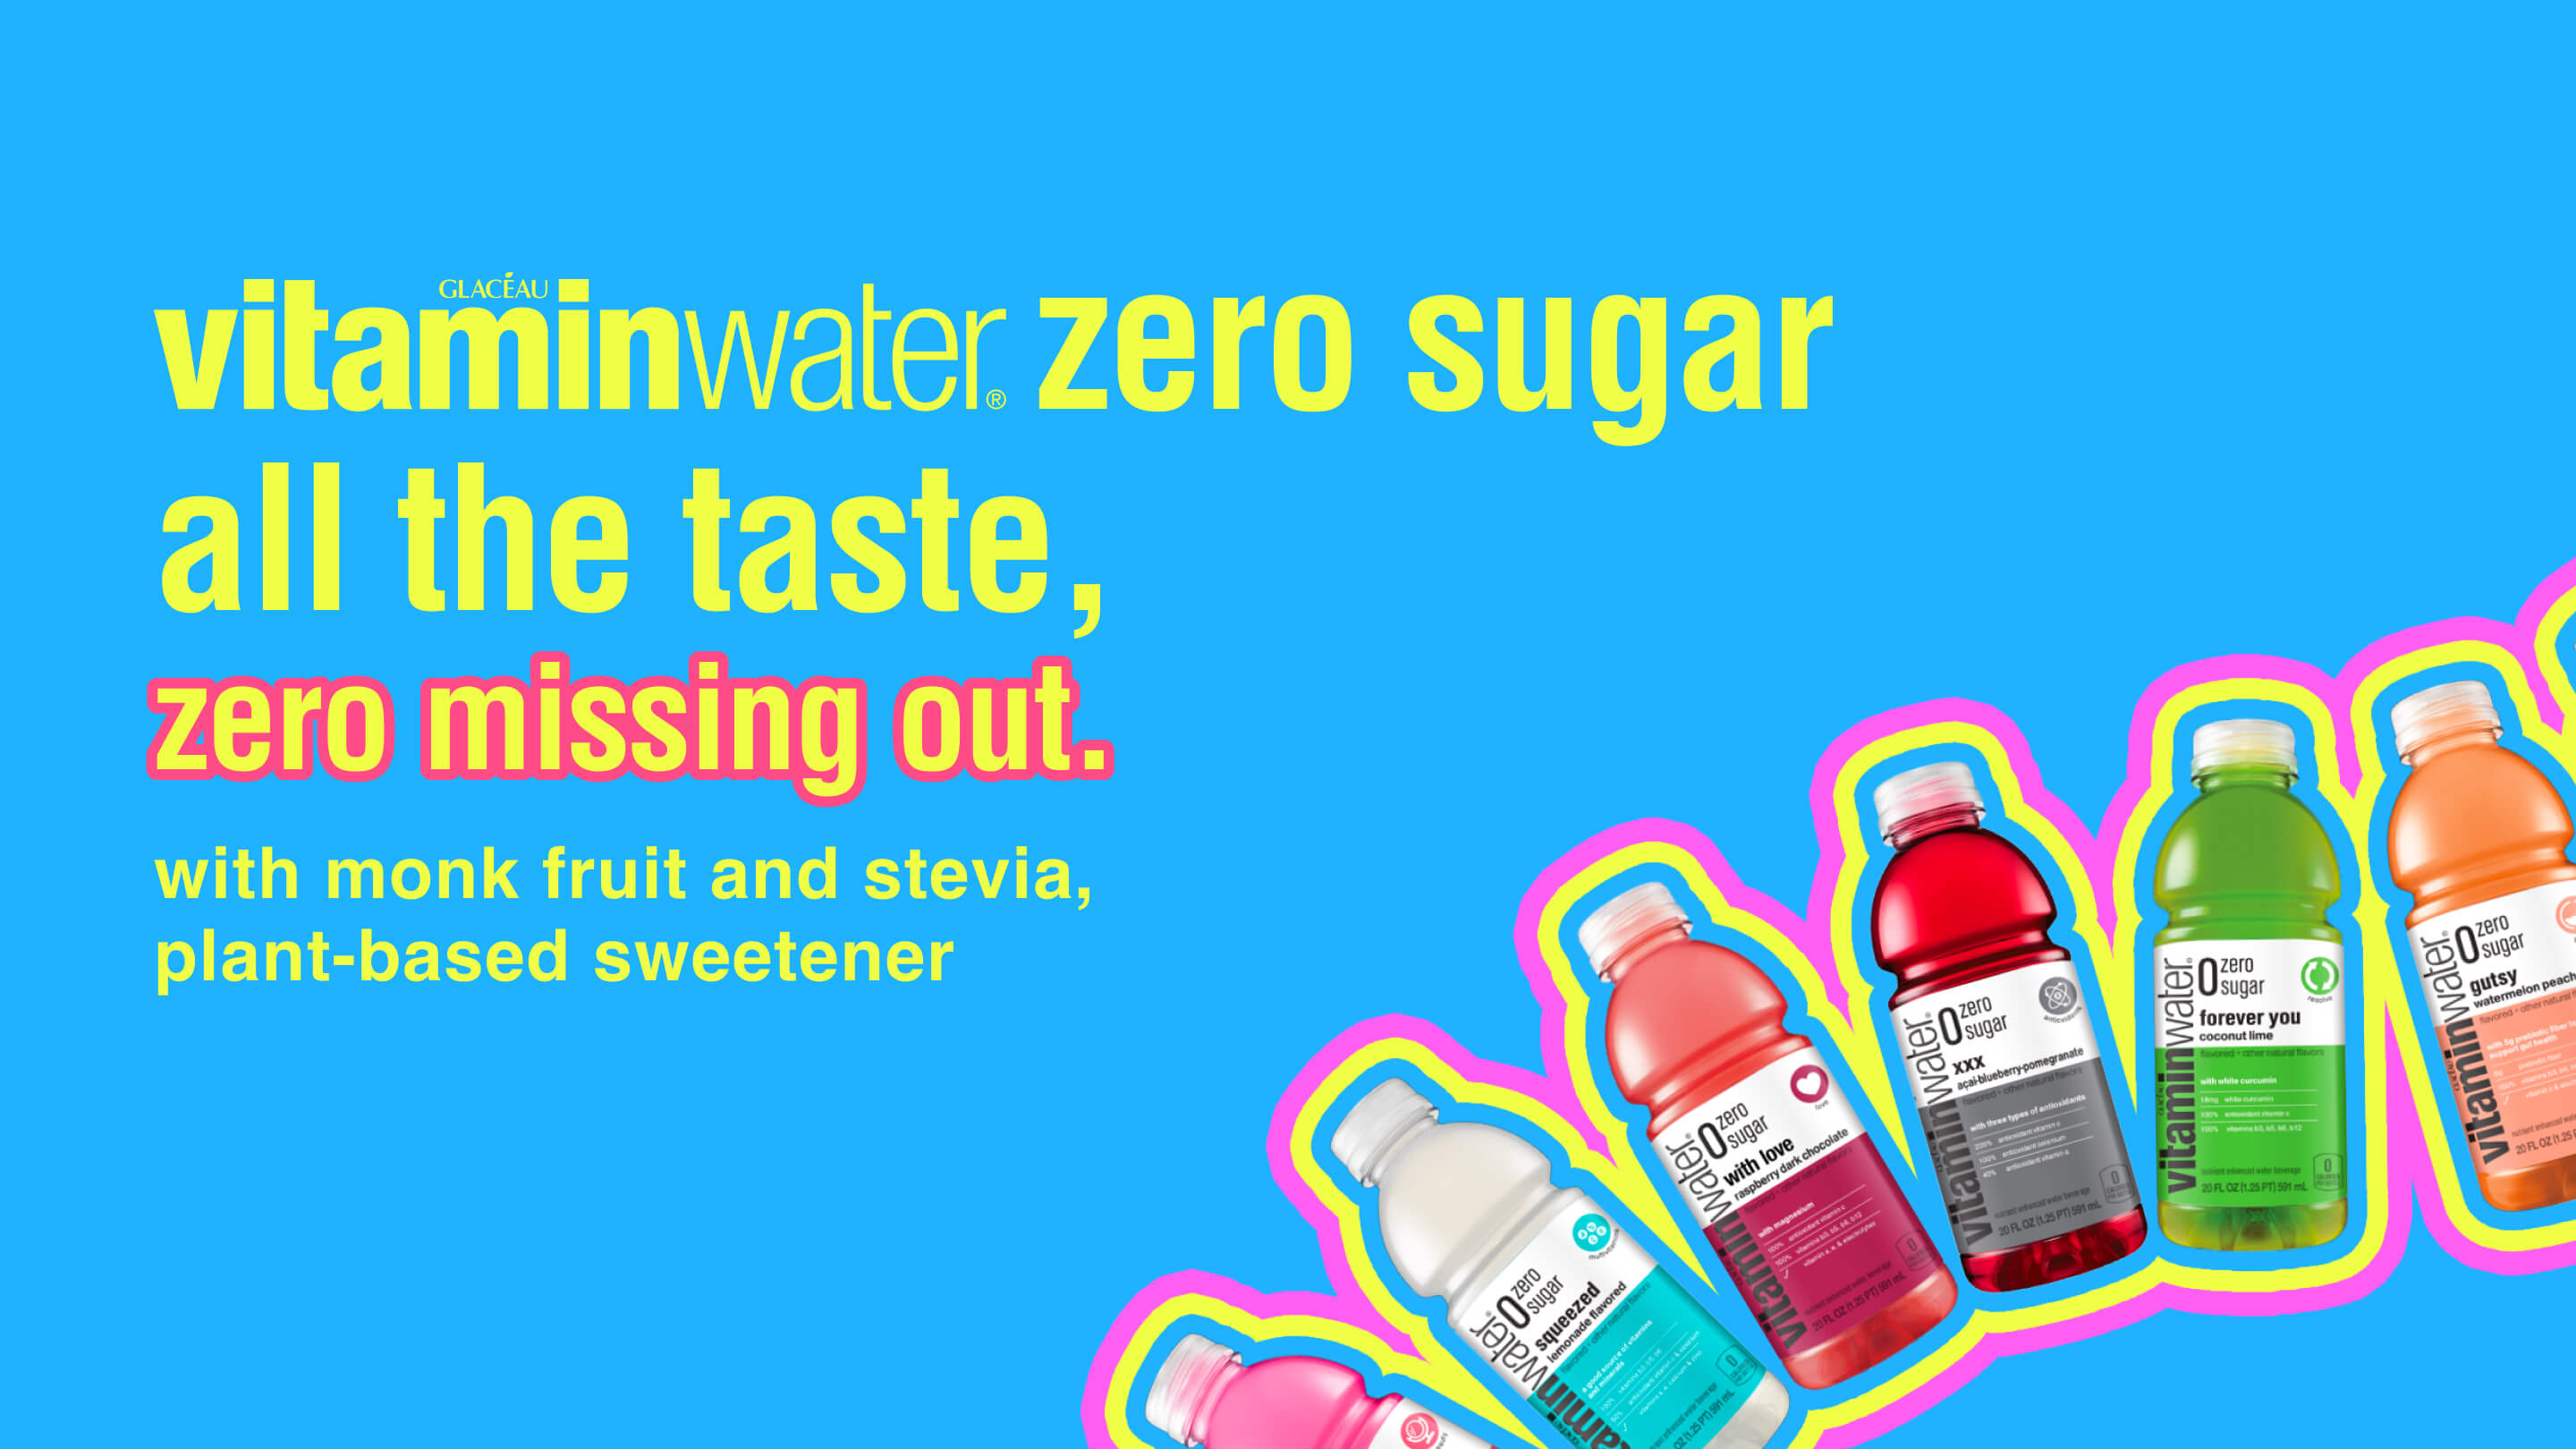 Various Vitaminwater Zero Sugar bottles arranged in a curve on a blue blackgroun, with the phrase 'Vitaminwater Zero Sugar all new taste, zero missing out.' displayed on the left